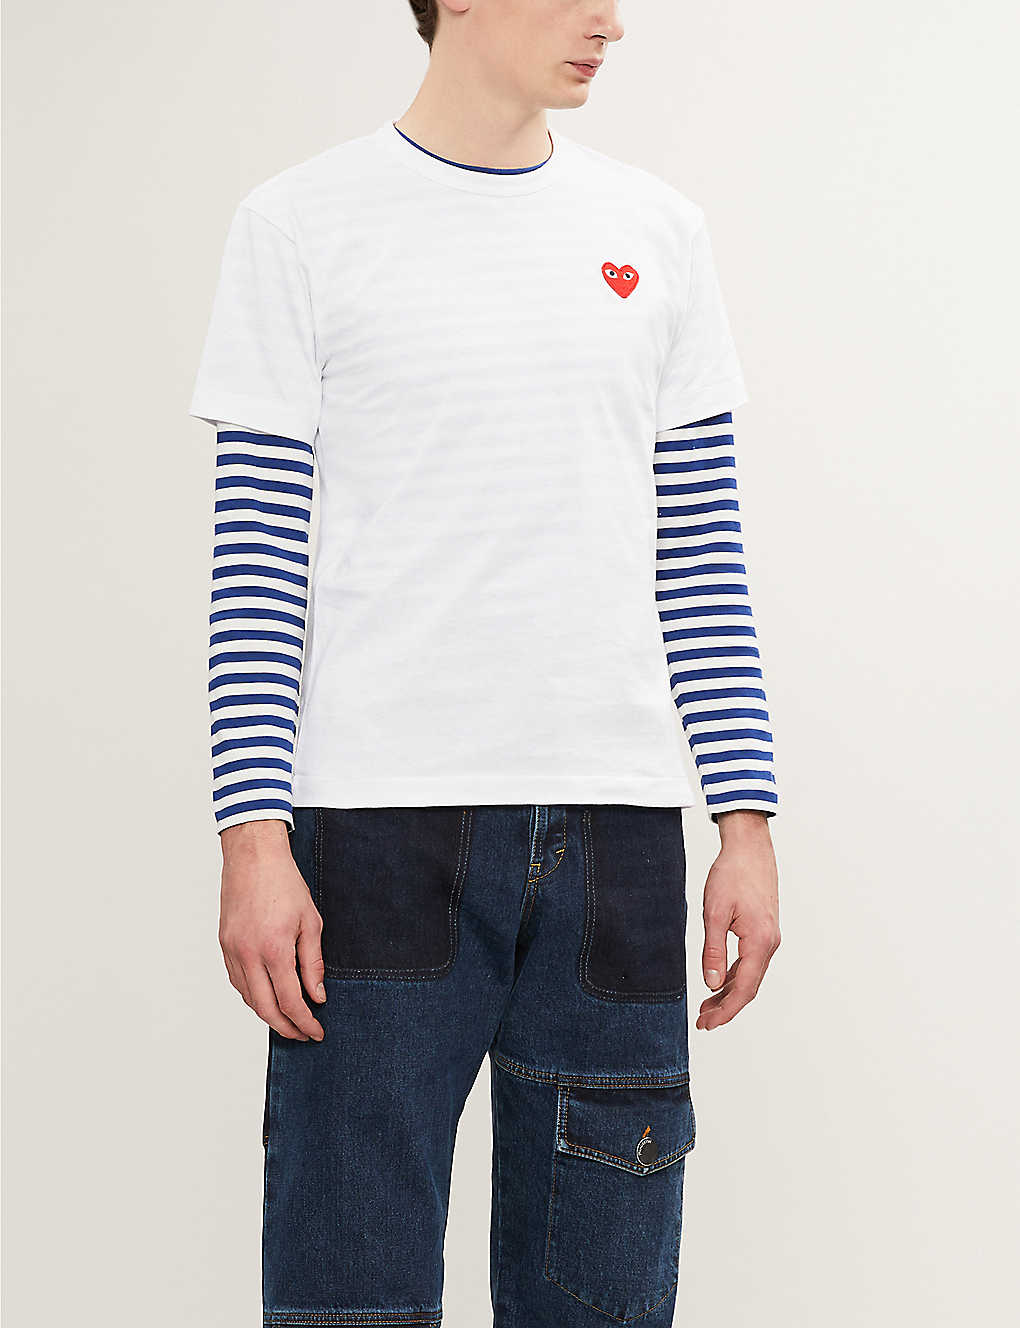 Embroidered heart cotton t-shirt(2831091)